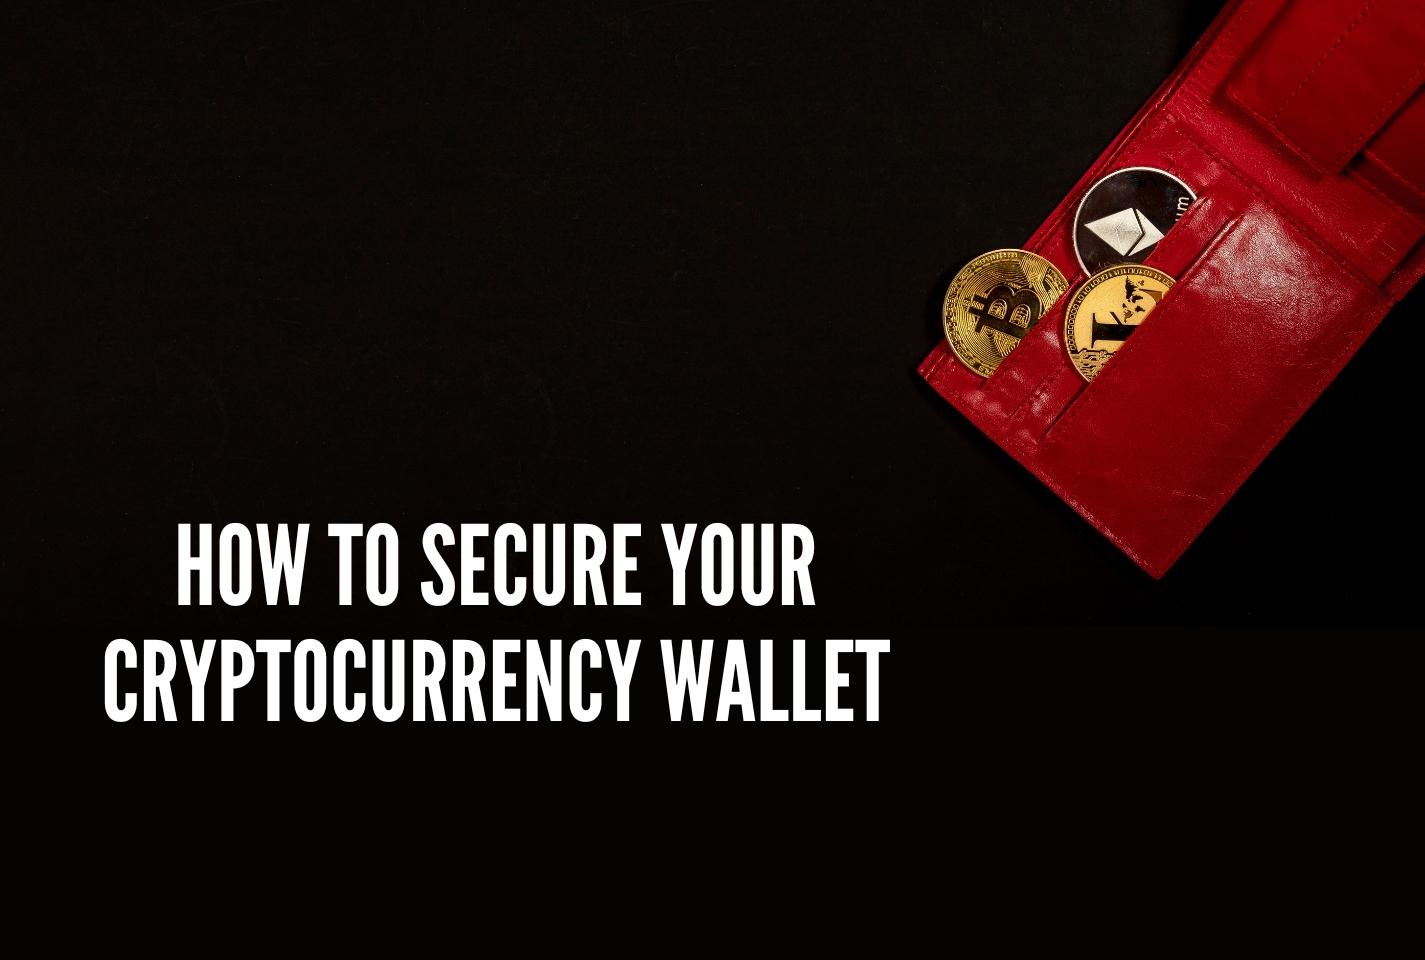 How to Secure Your Cryptocurrency Wallet